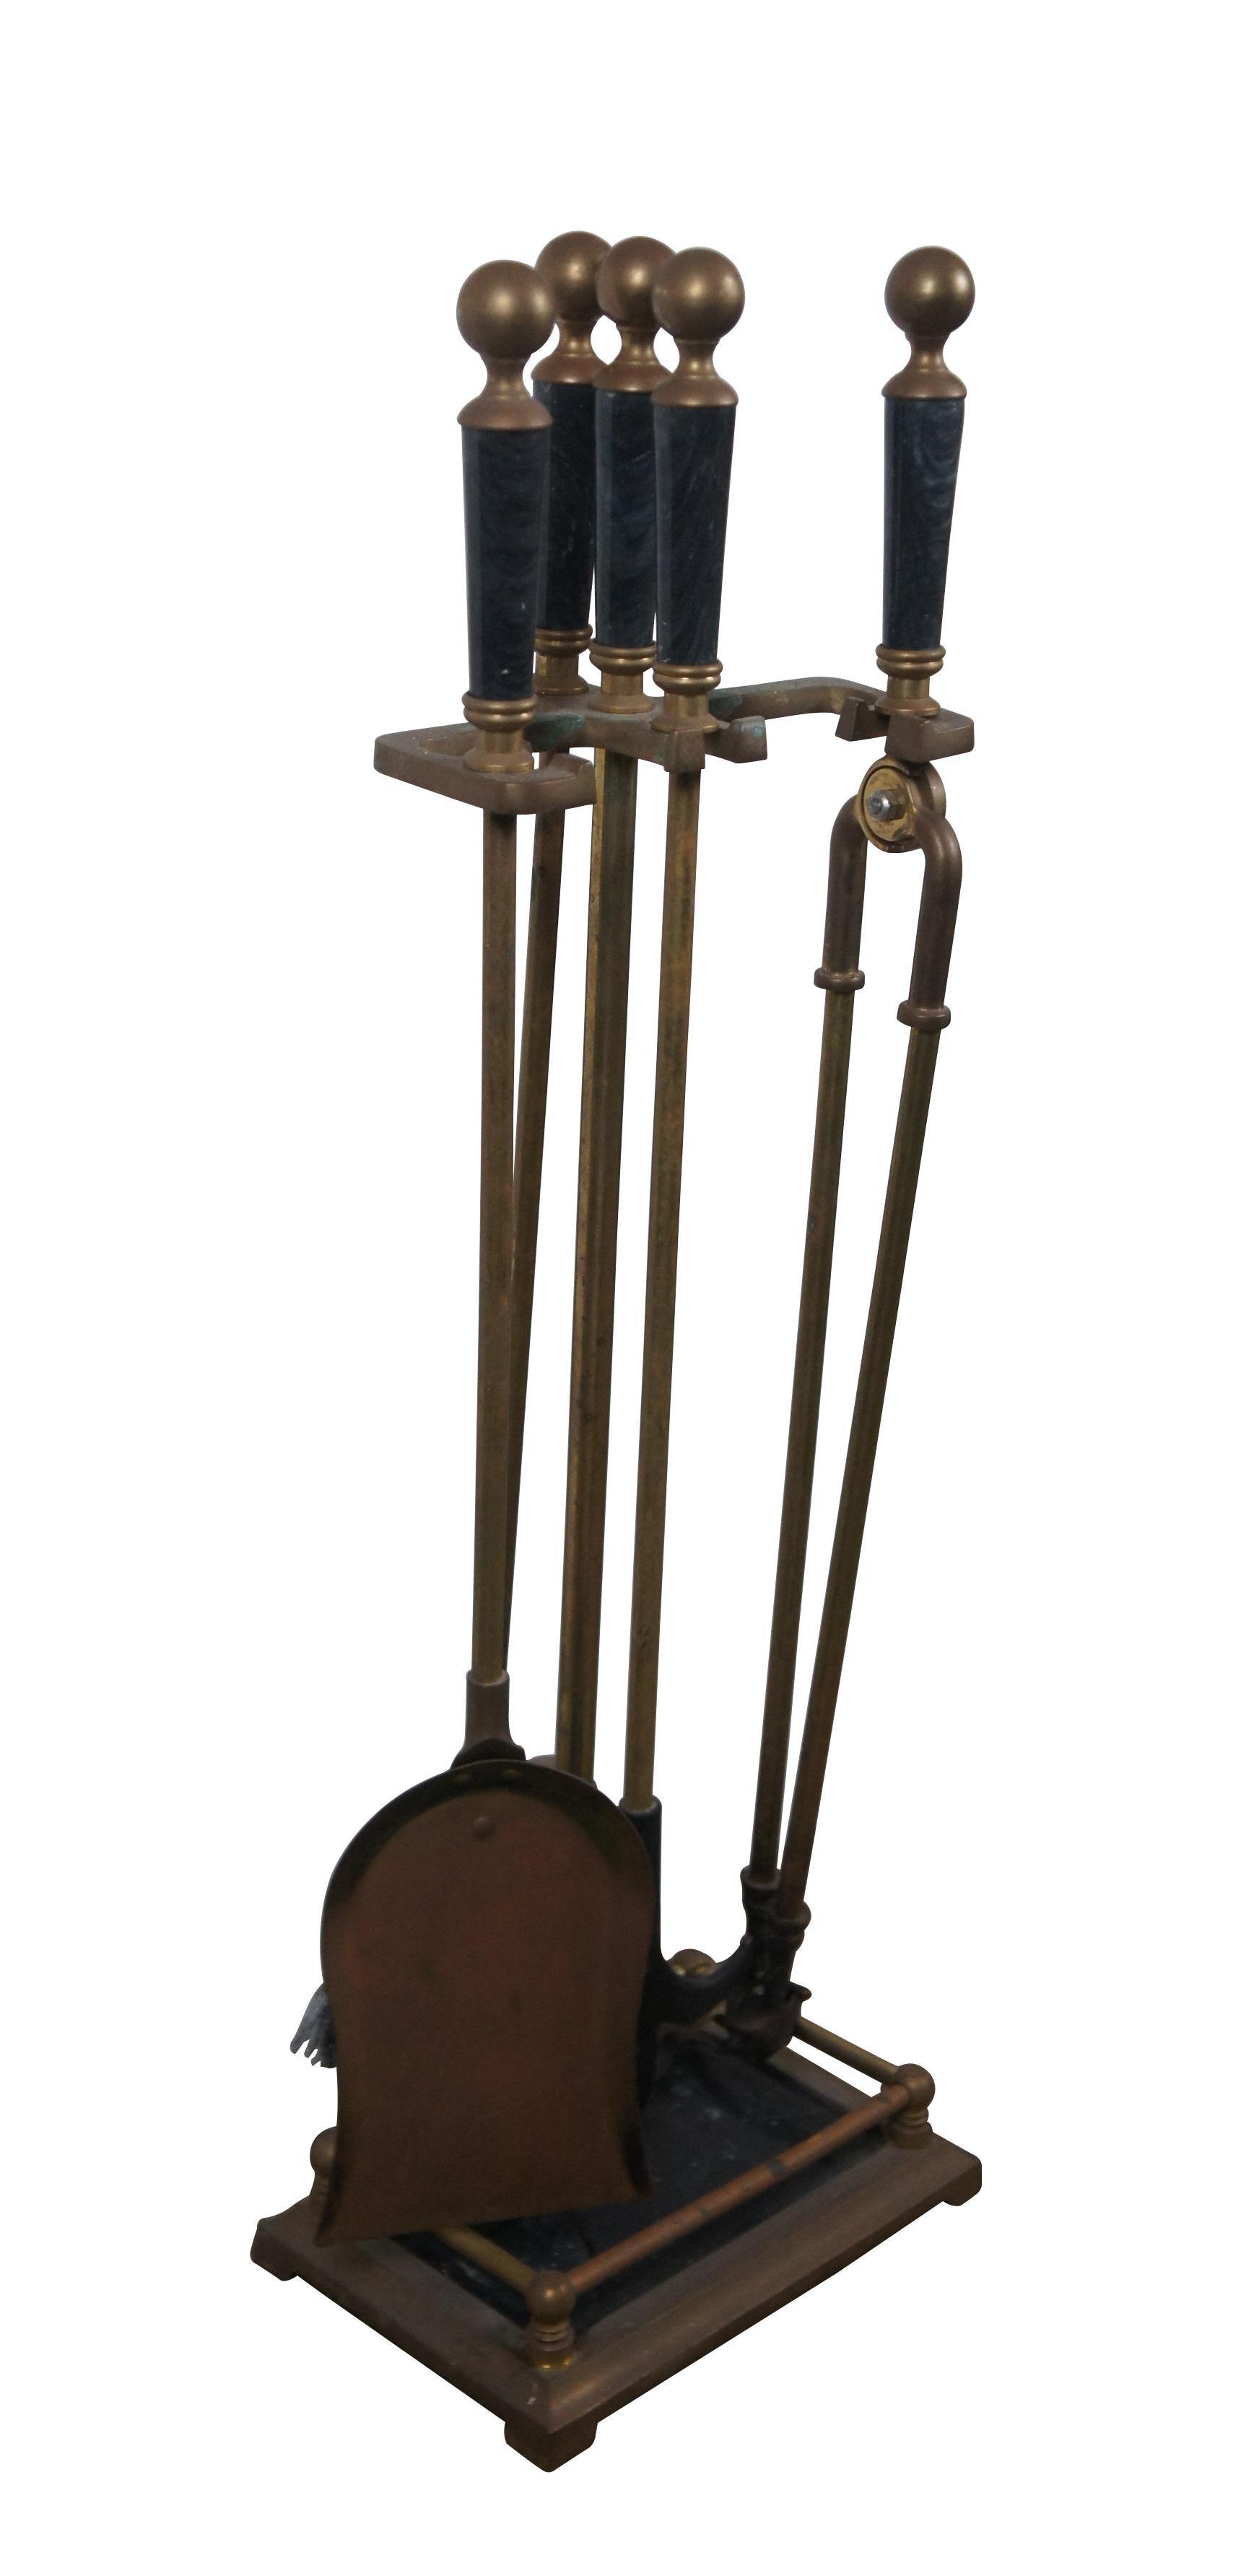 Mid to late 20th century five piece set of fireplace / hearth tools and stand by Decorative Crafts Inc, item number 2921. Made of brass with black marble base and tool grips with round finials. Set includes stand, shovel, poker, tongs, and